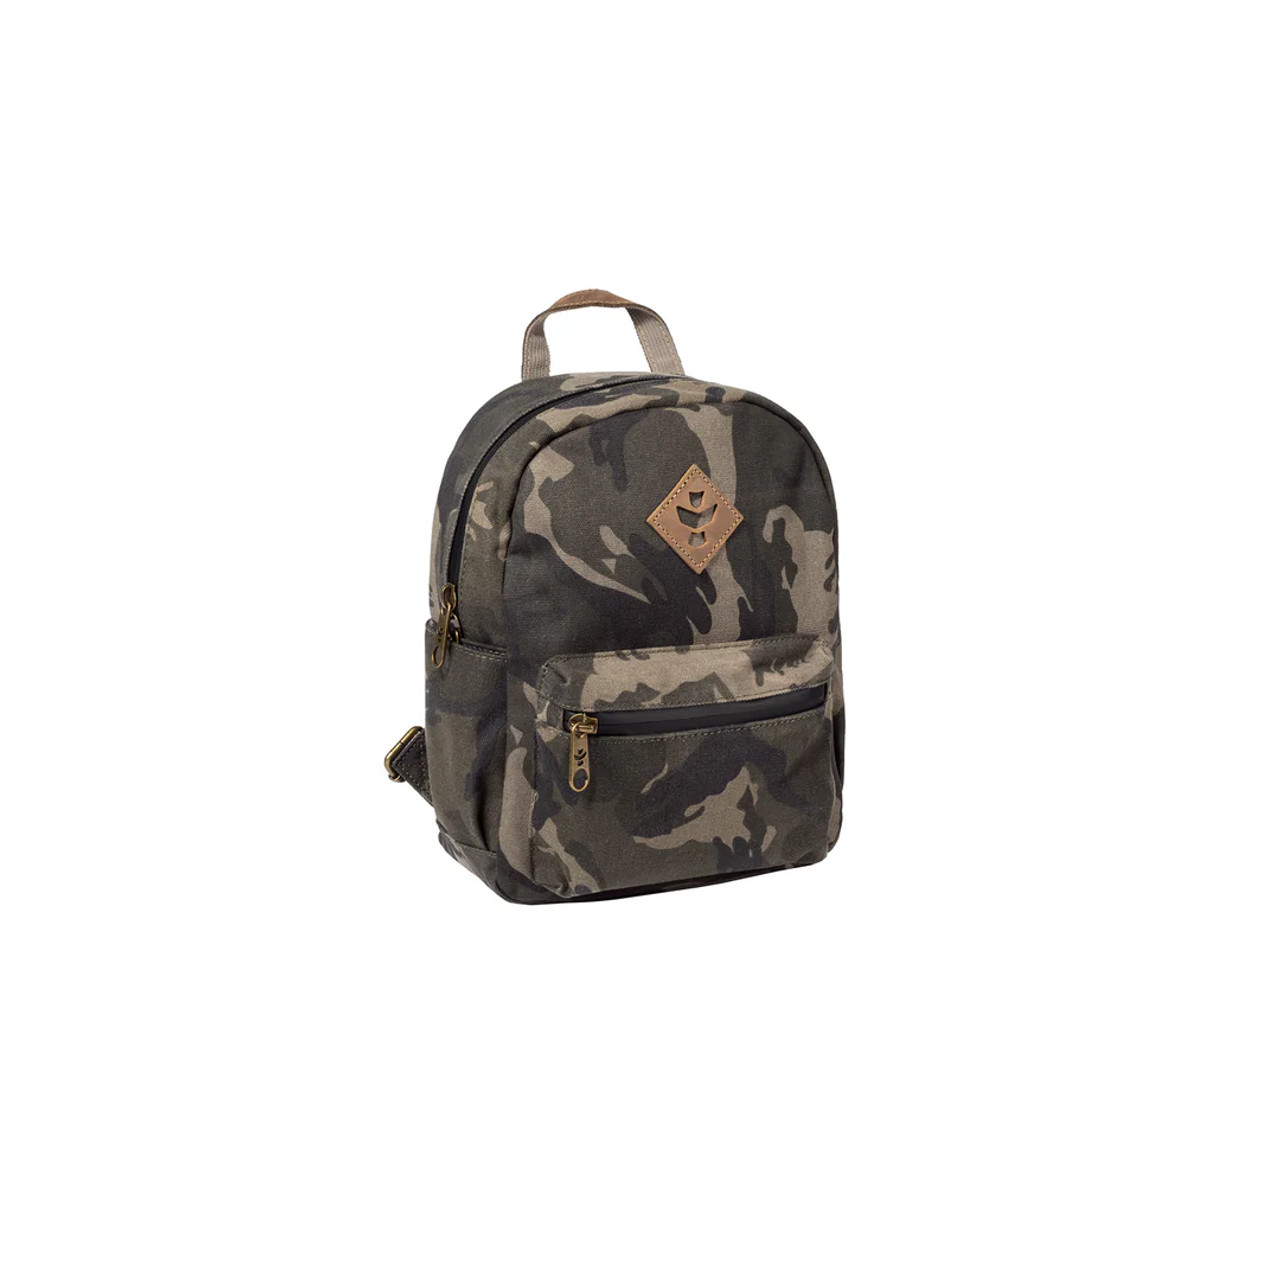 The Shorty - Smell Proof Mini Backpack - Camo